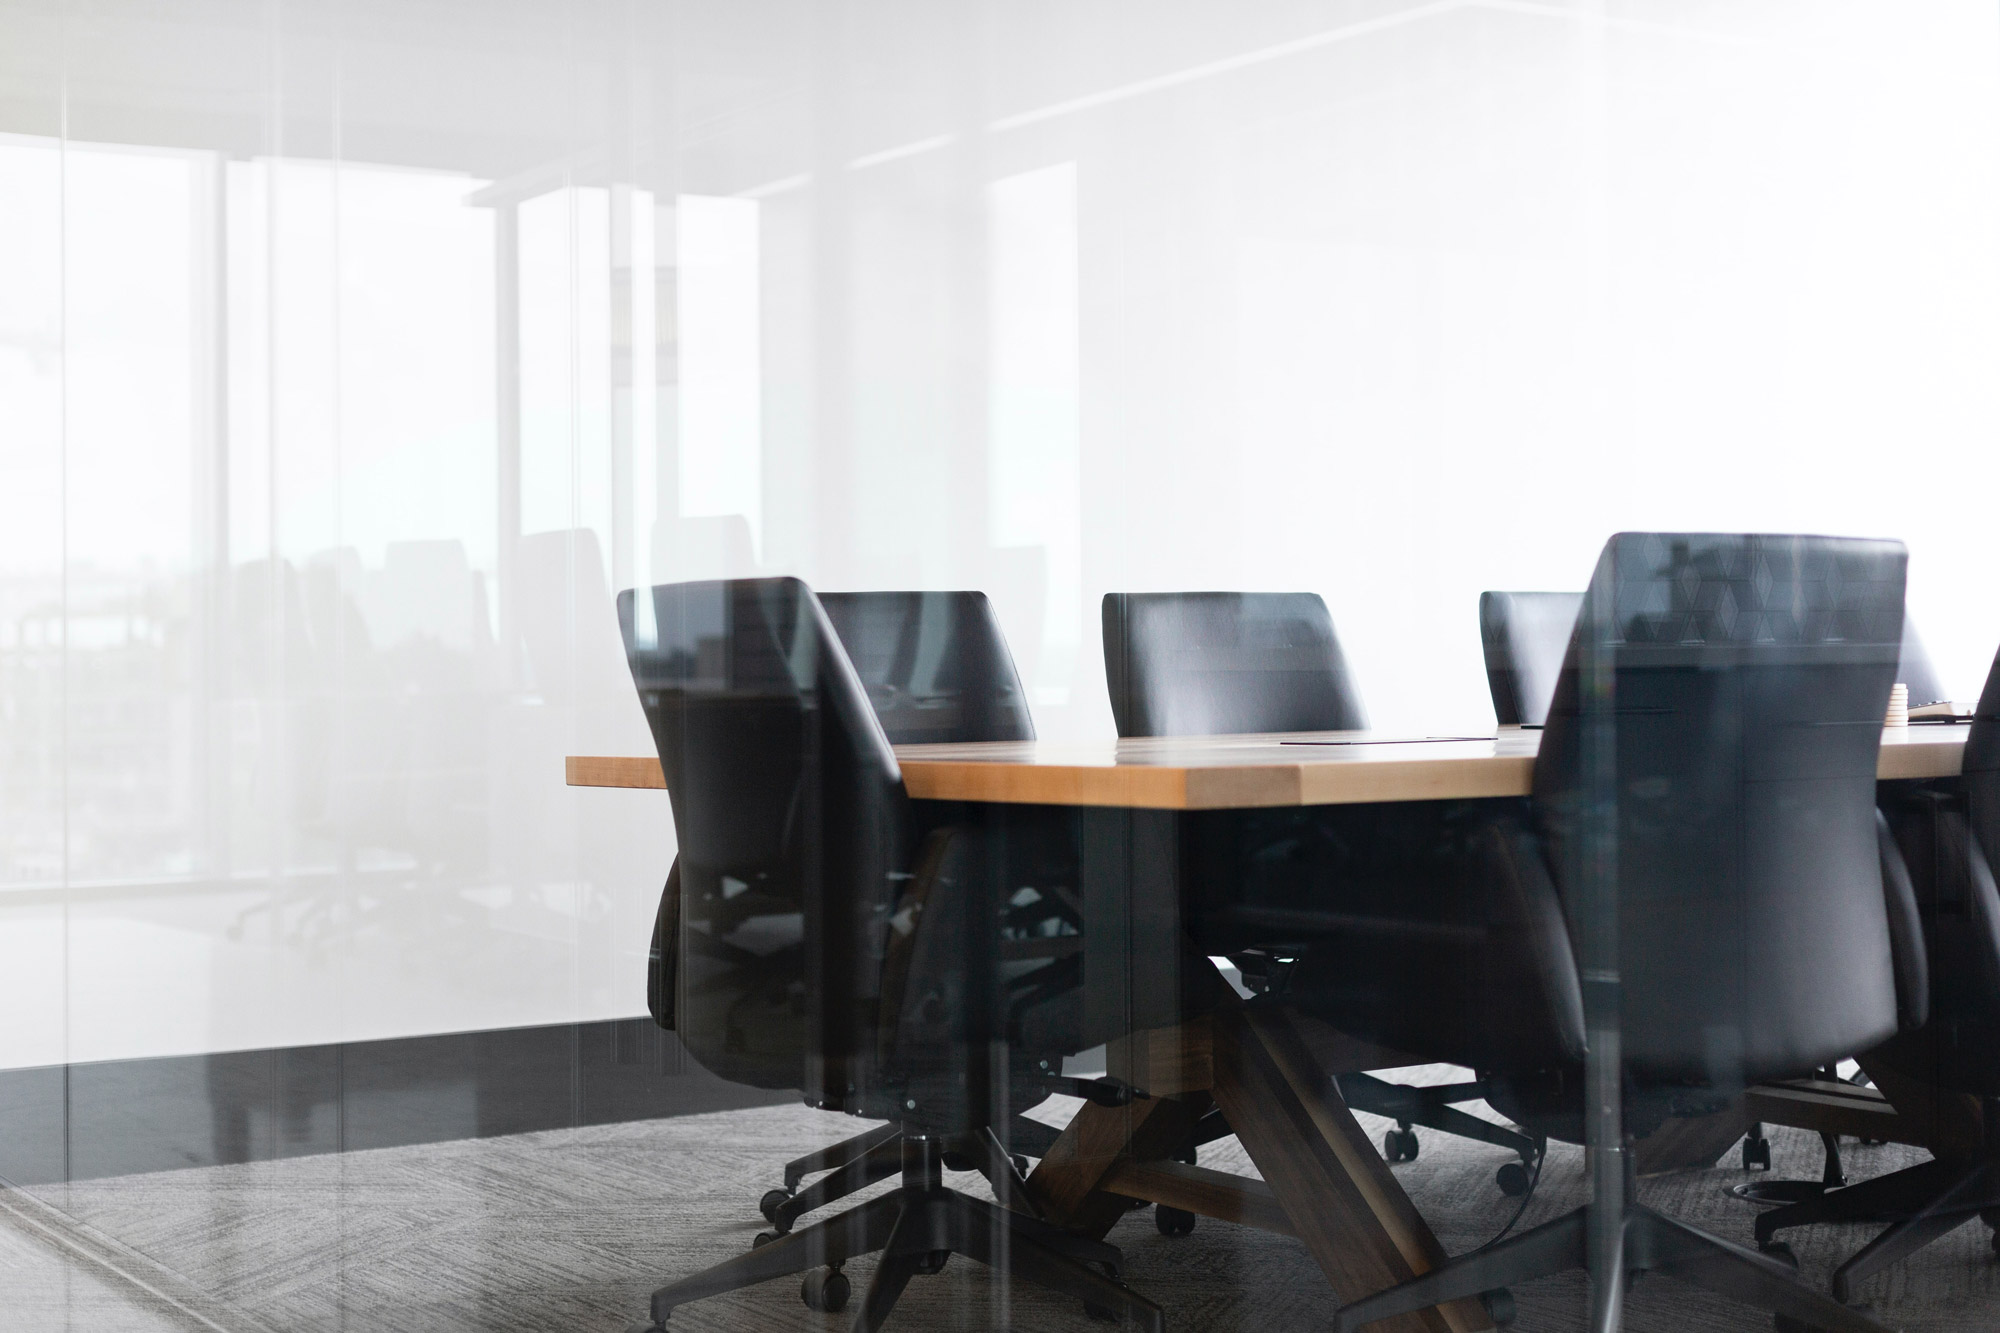 Stock image of some chairs around a conference room table through glass.